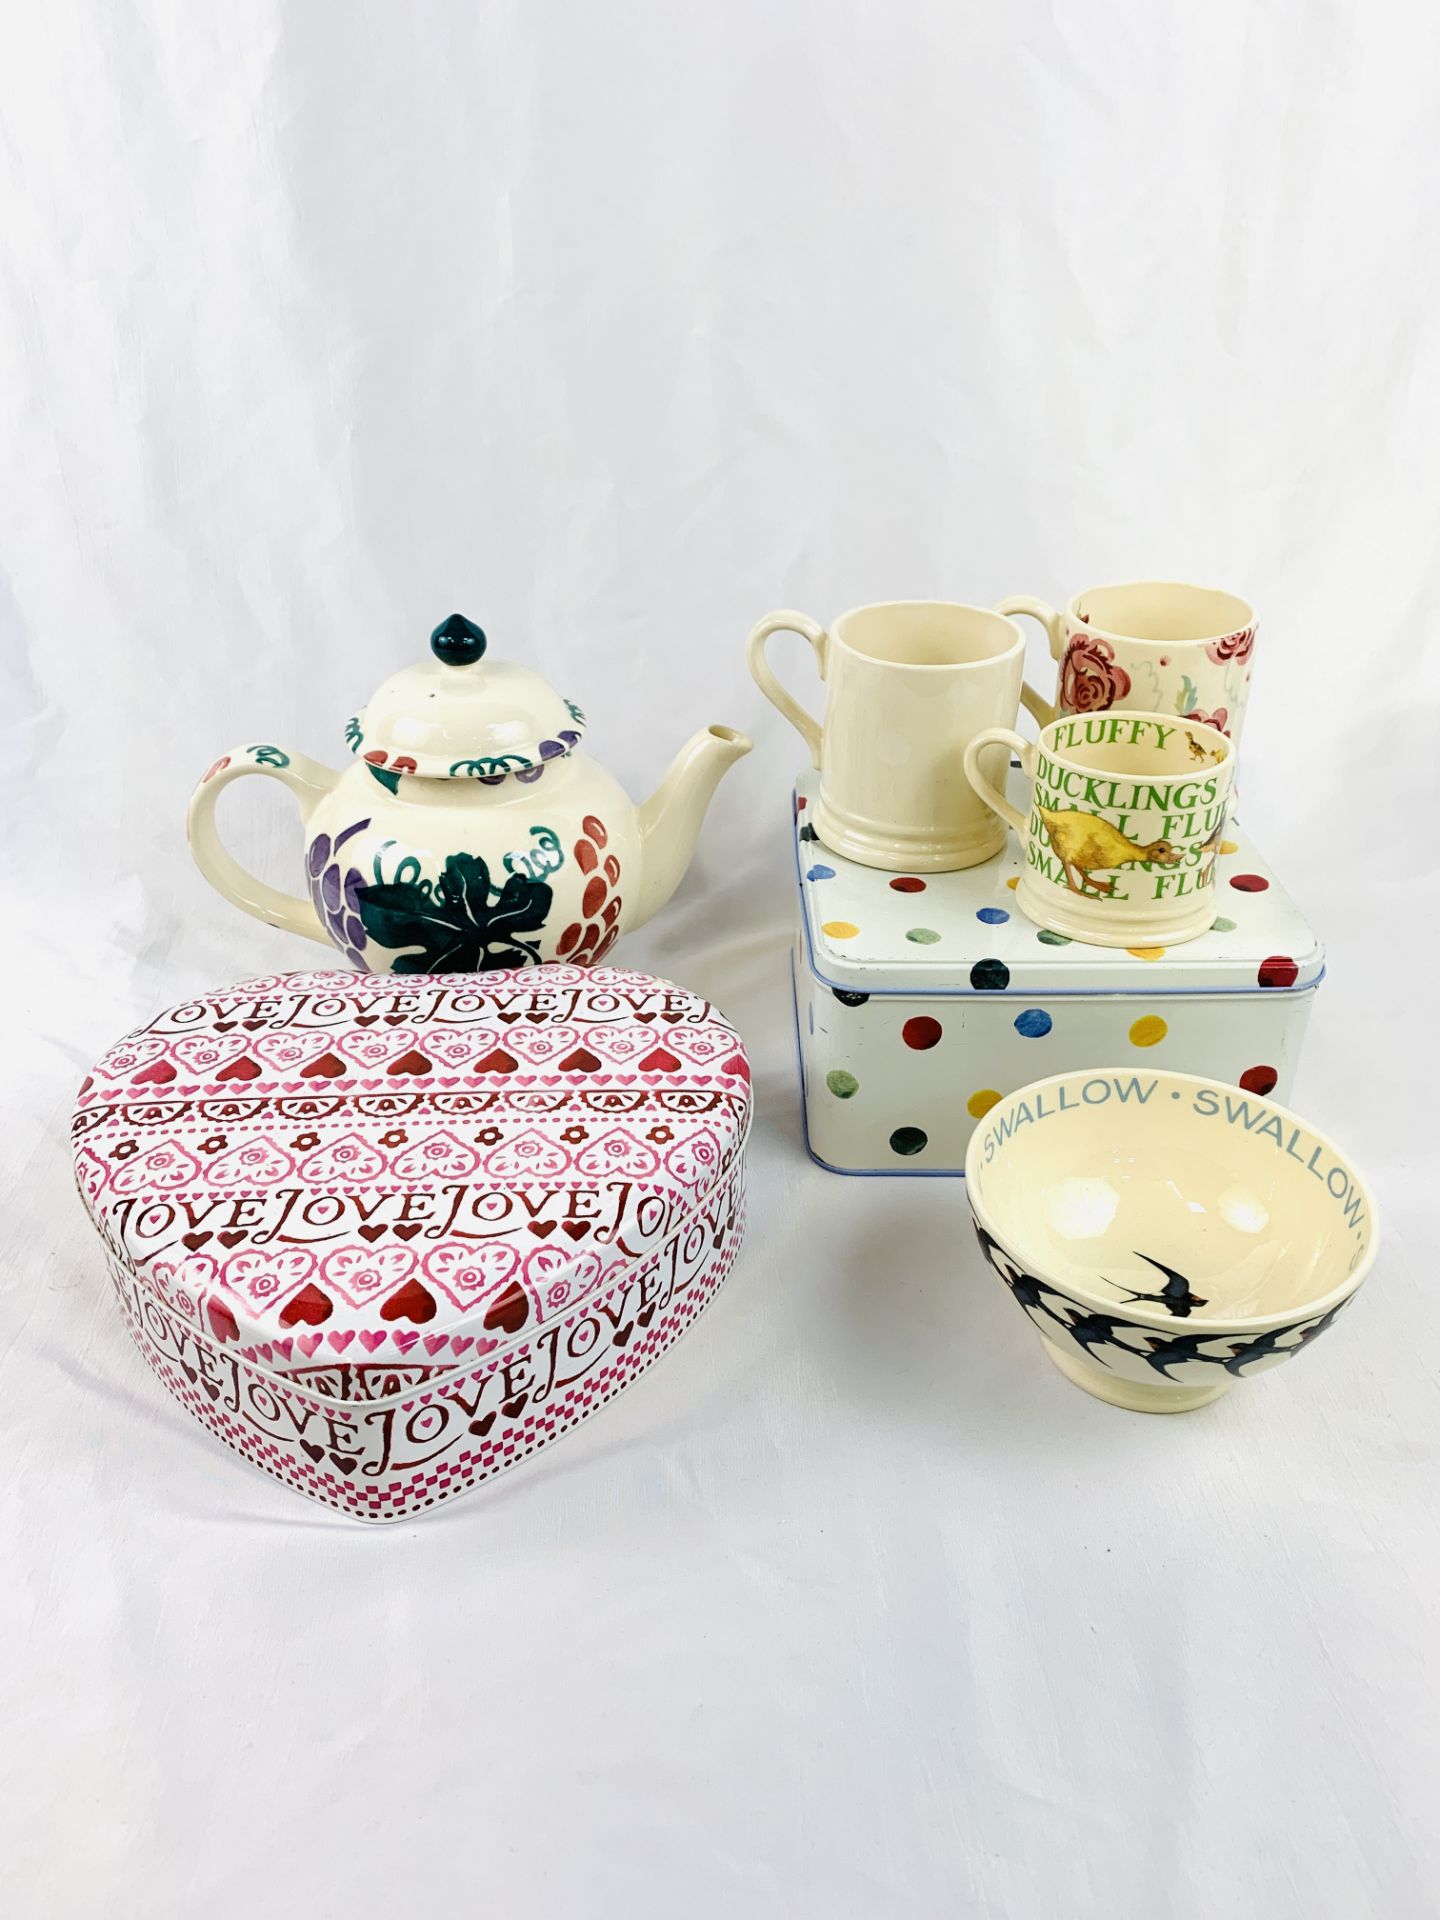 A quantity of Emma Bridgewater pottery and tins